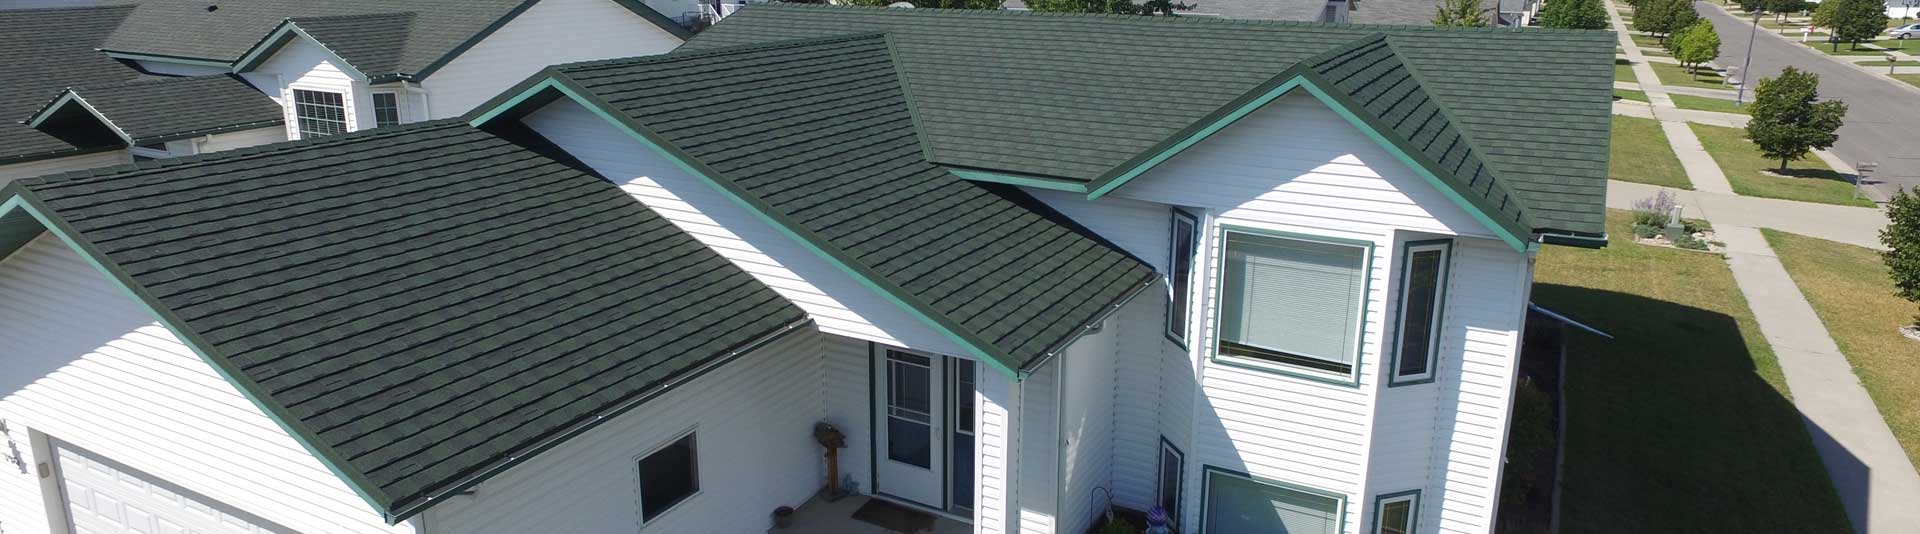 Quality Roofing & Renovation Services